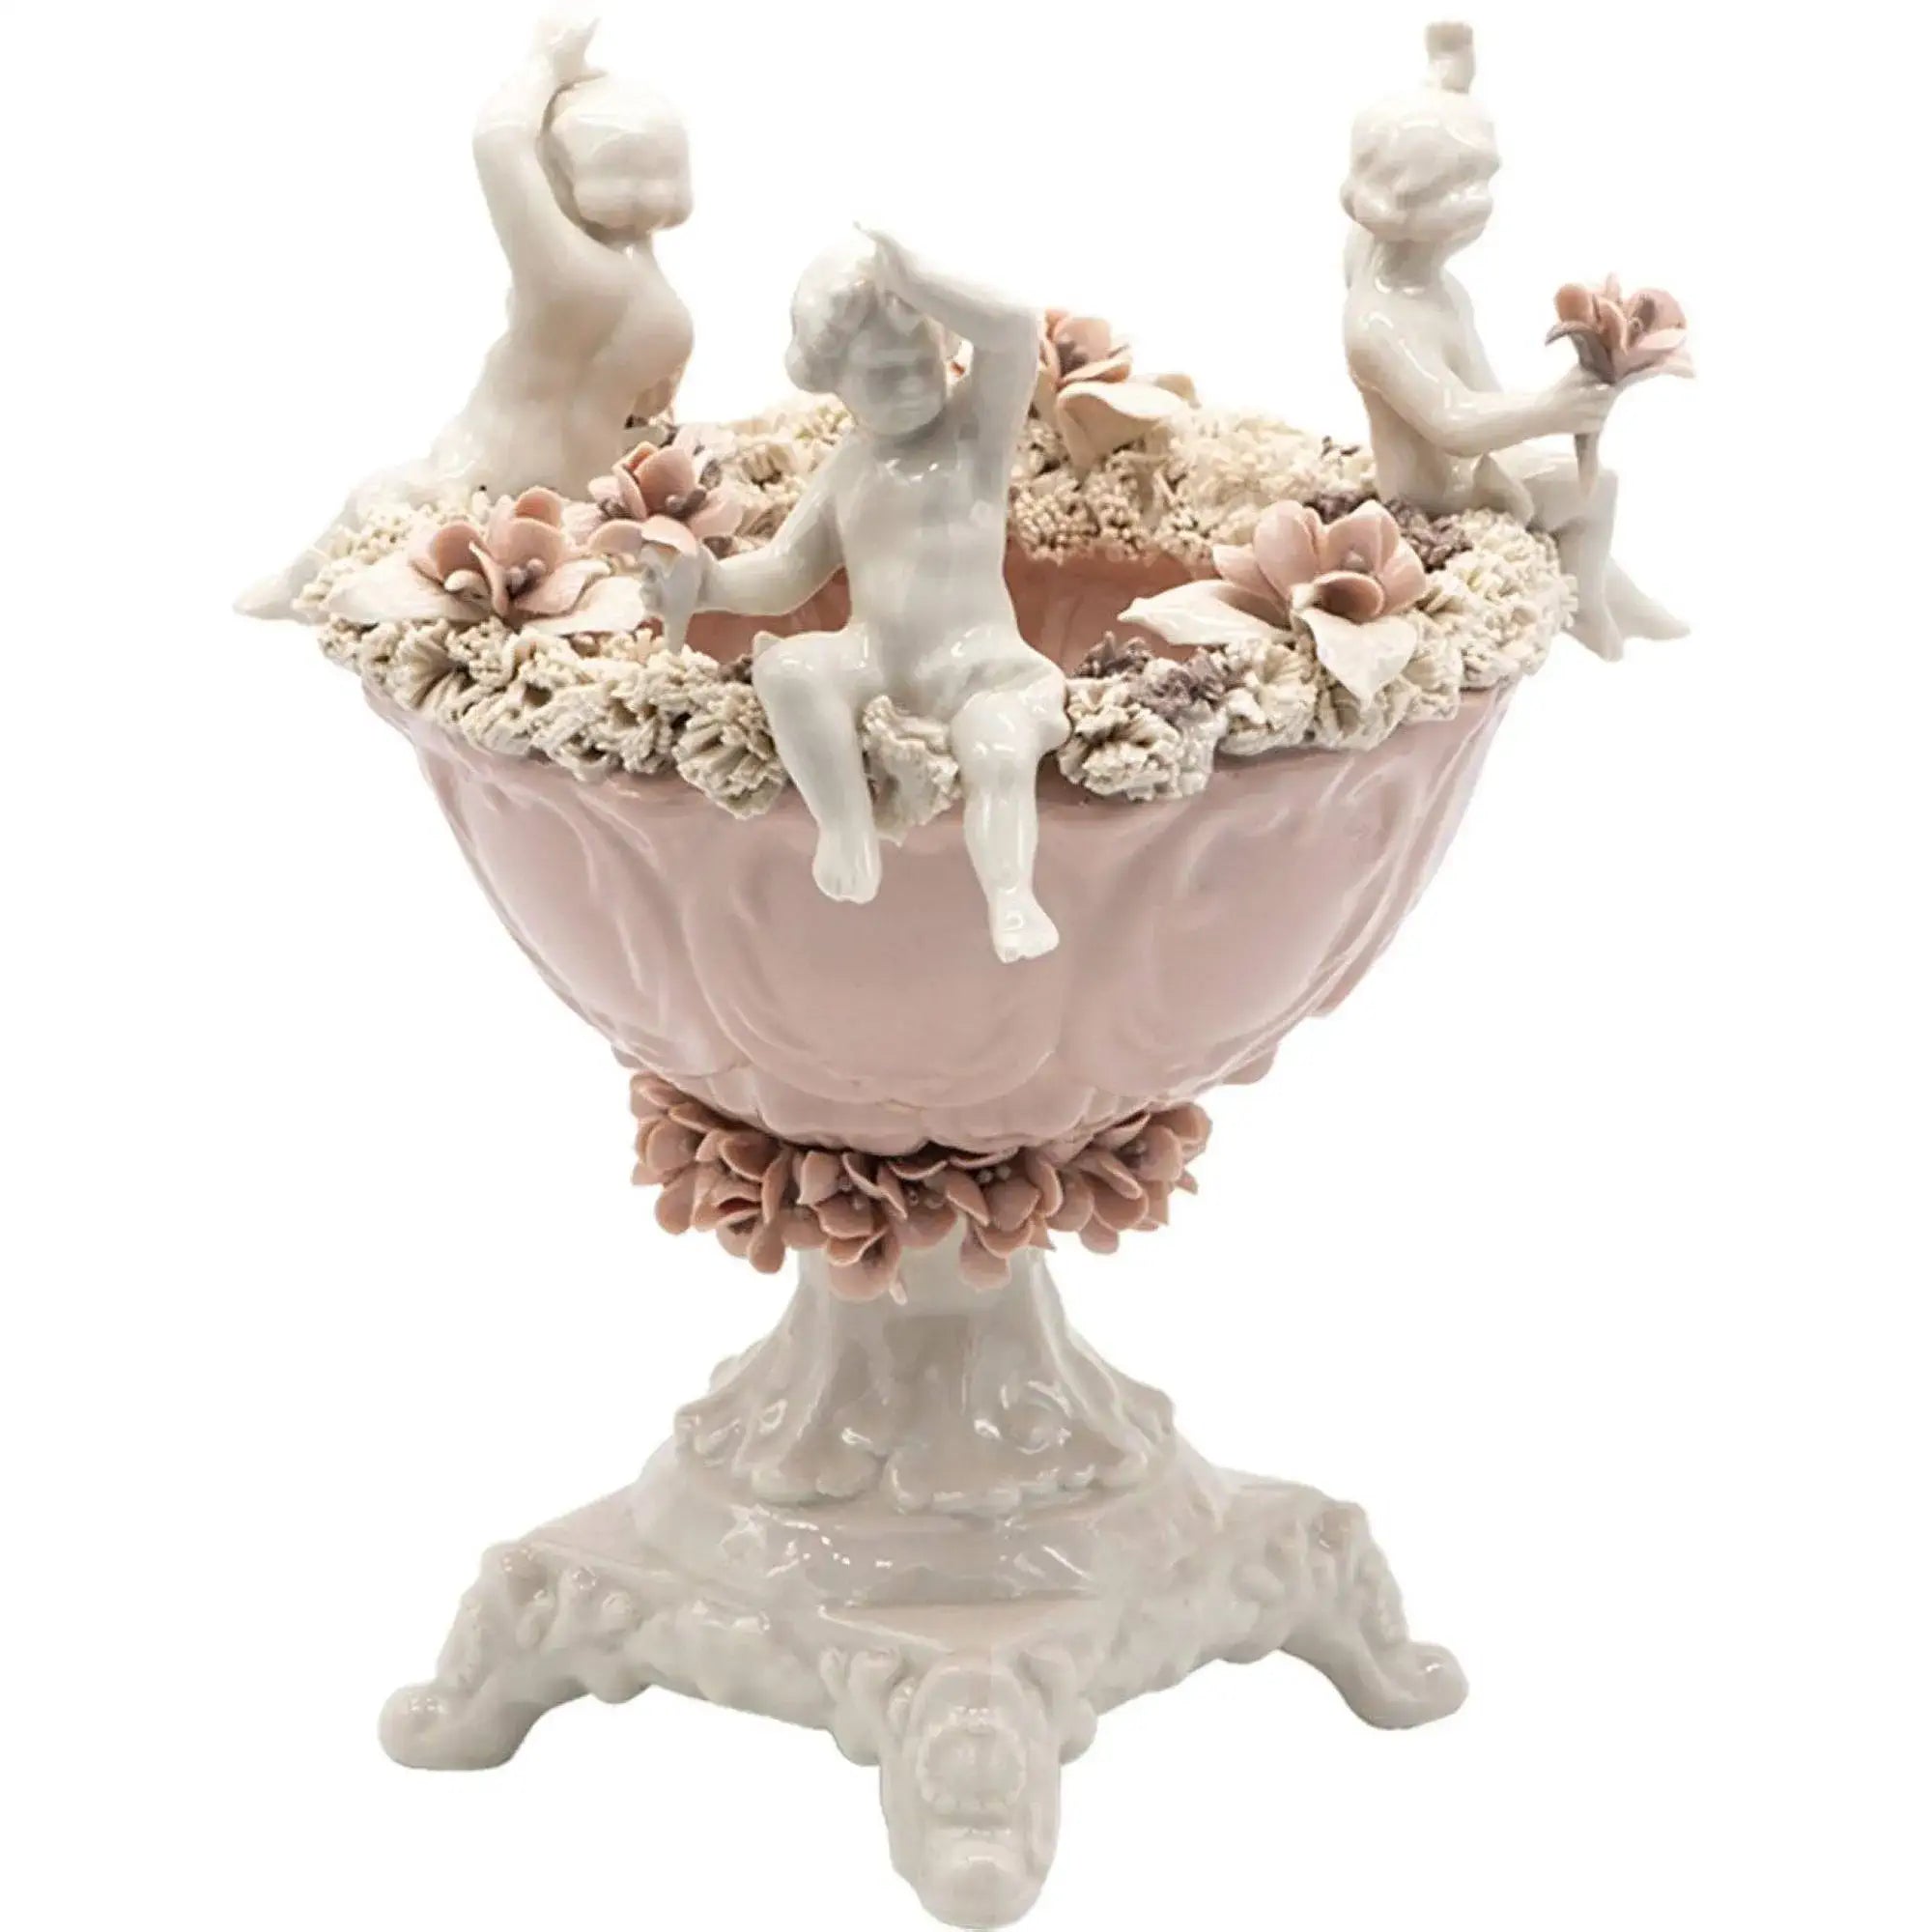 Centrepiece with Angels - Capodimonte Porcelain